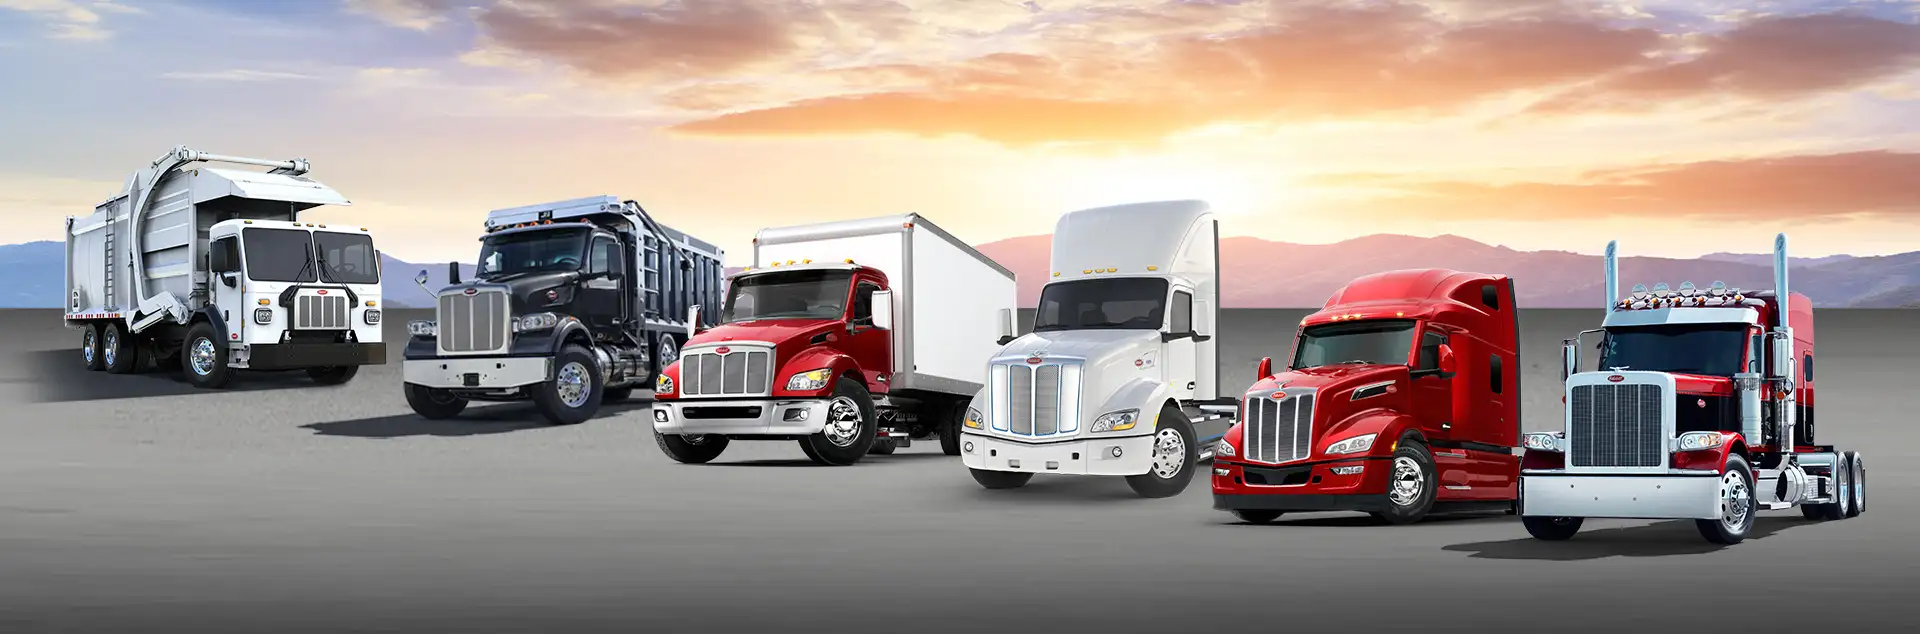 Banner Background - Peterbilt offers the widest lineup of vehicles and configurations in the industry, along with financing and leasing options, to help you get the truck you need at a competitive price.